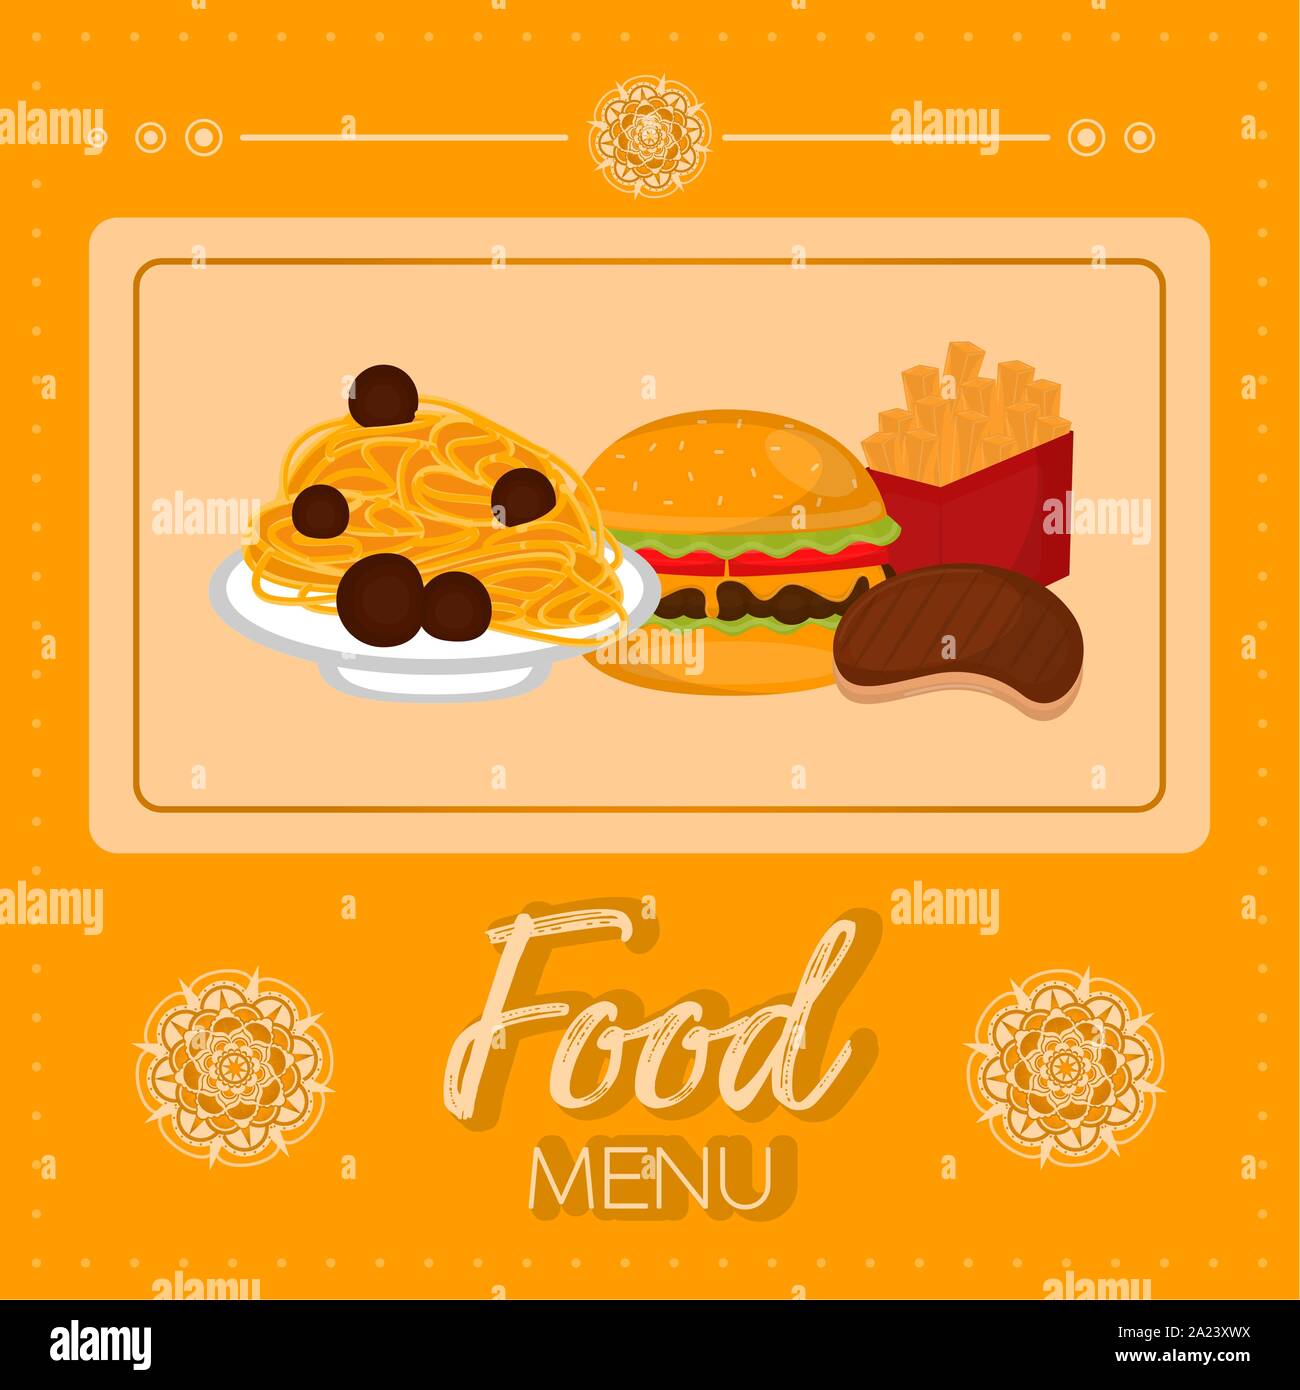 Food menu with a spaghetti, burguer, french fries and meat steak - Vector Stock Vector